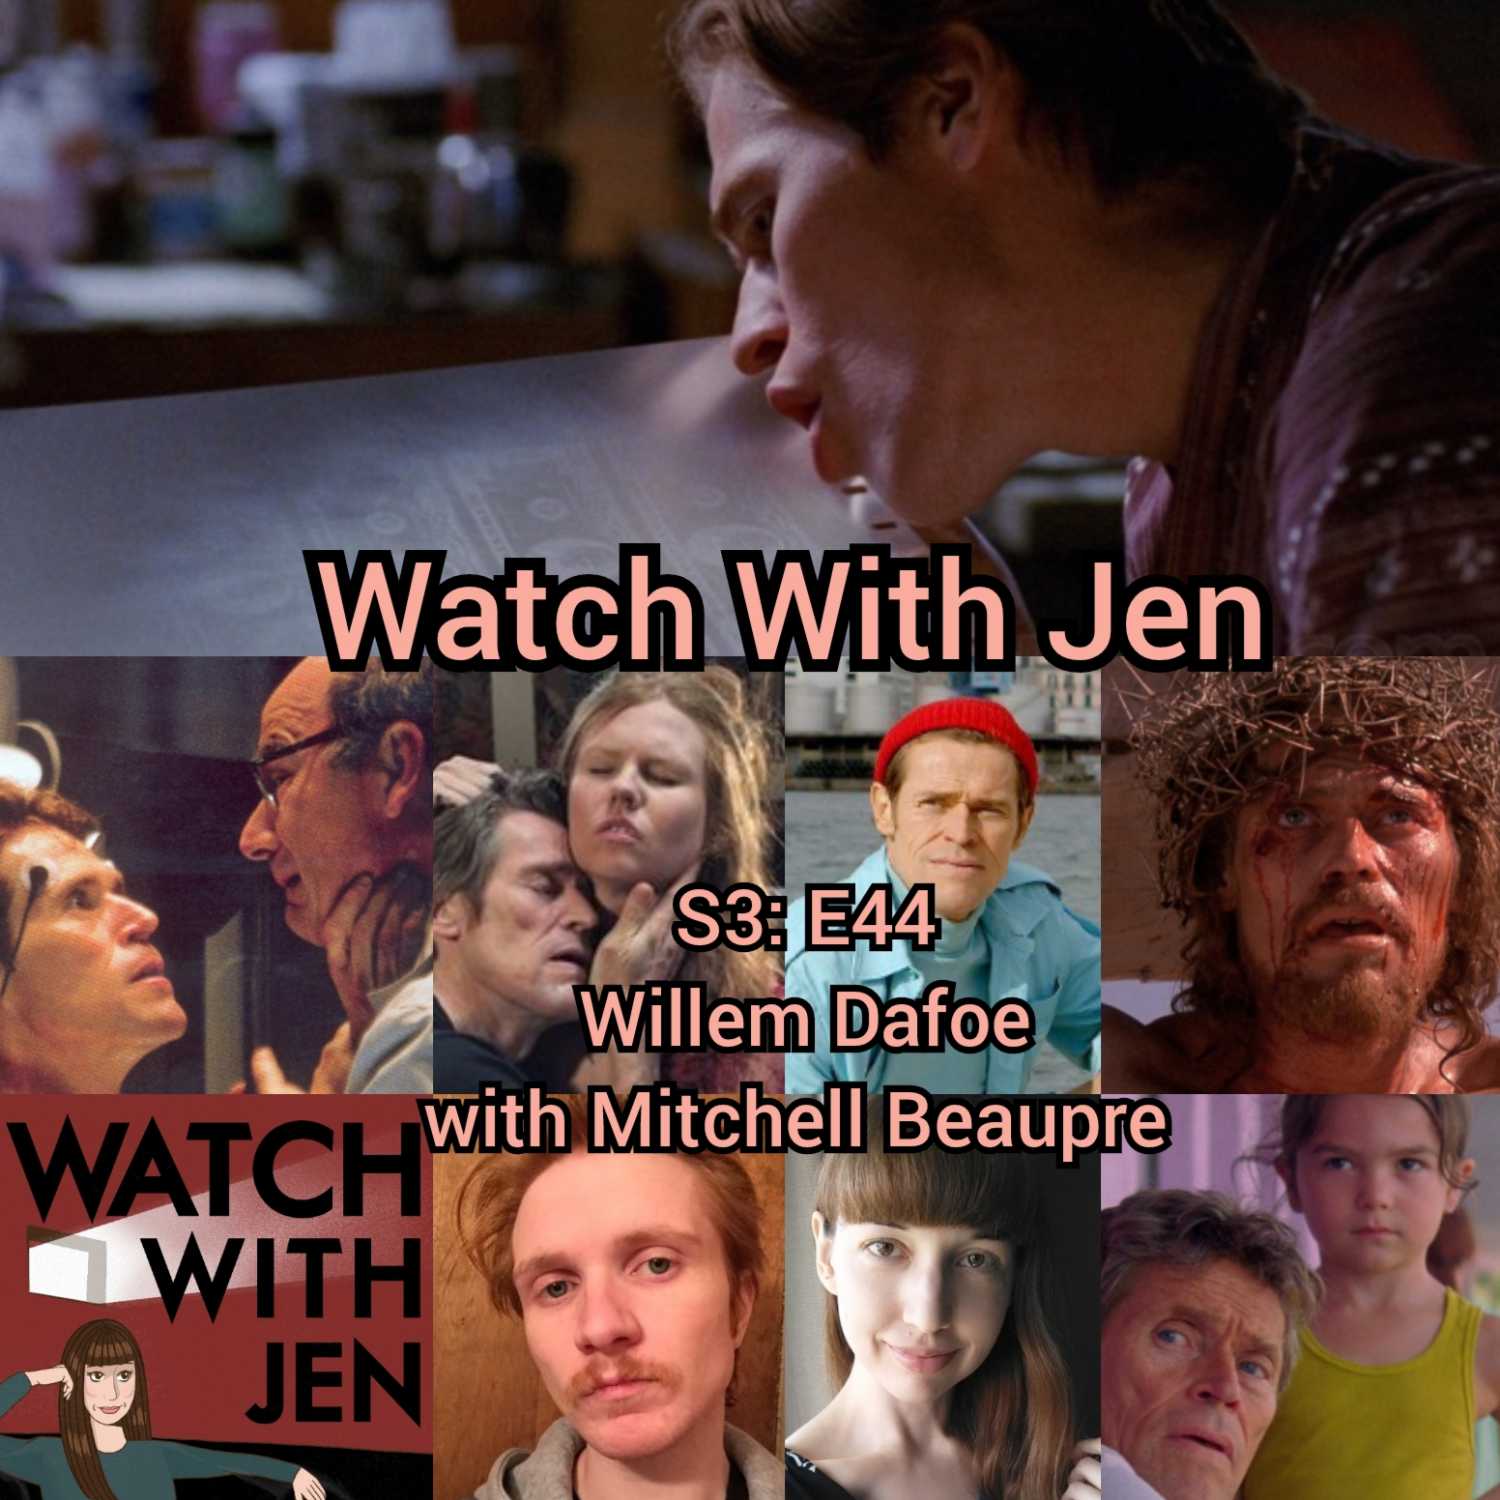 Watch With Jen - S3: E44 - Willem Dafoe with Mitchell Beaupre